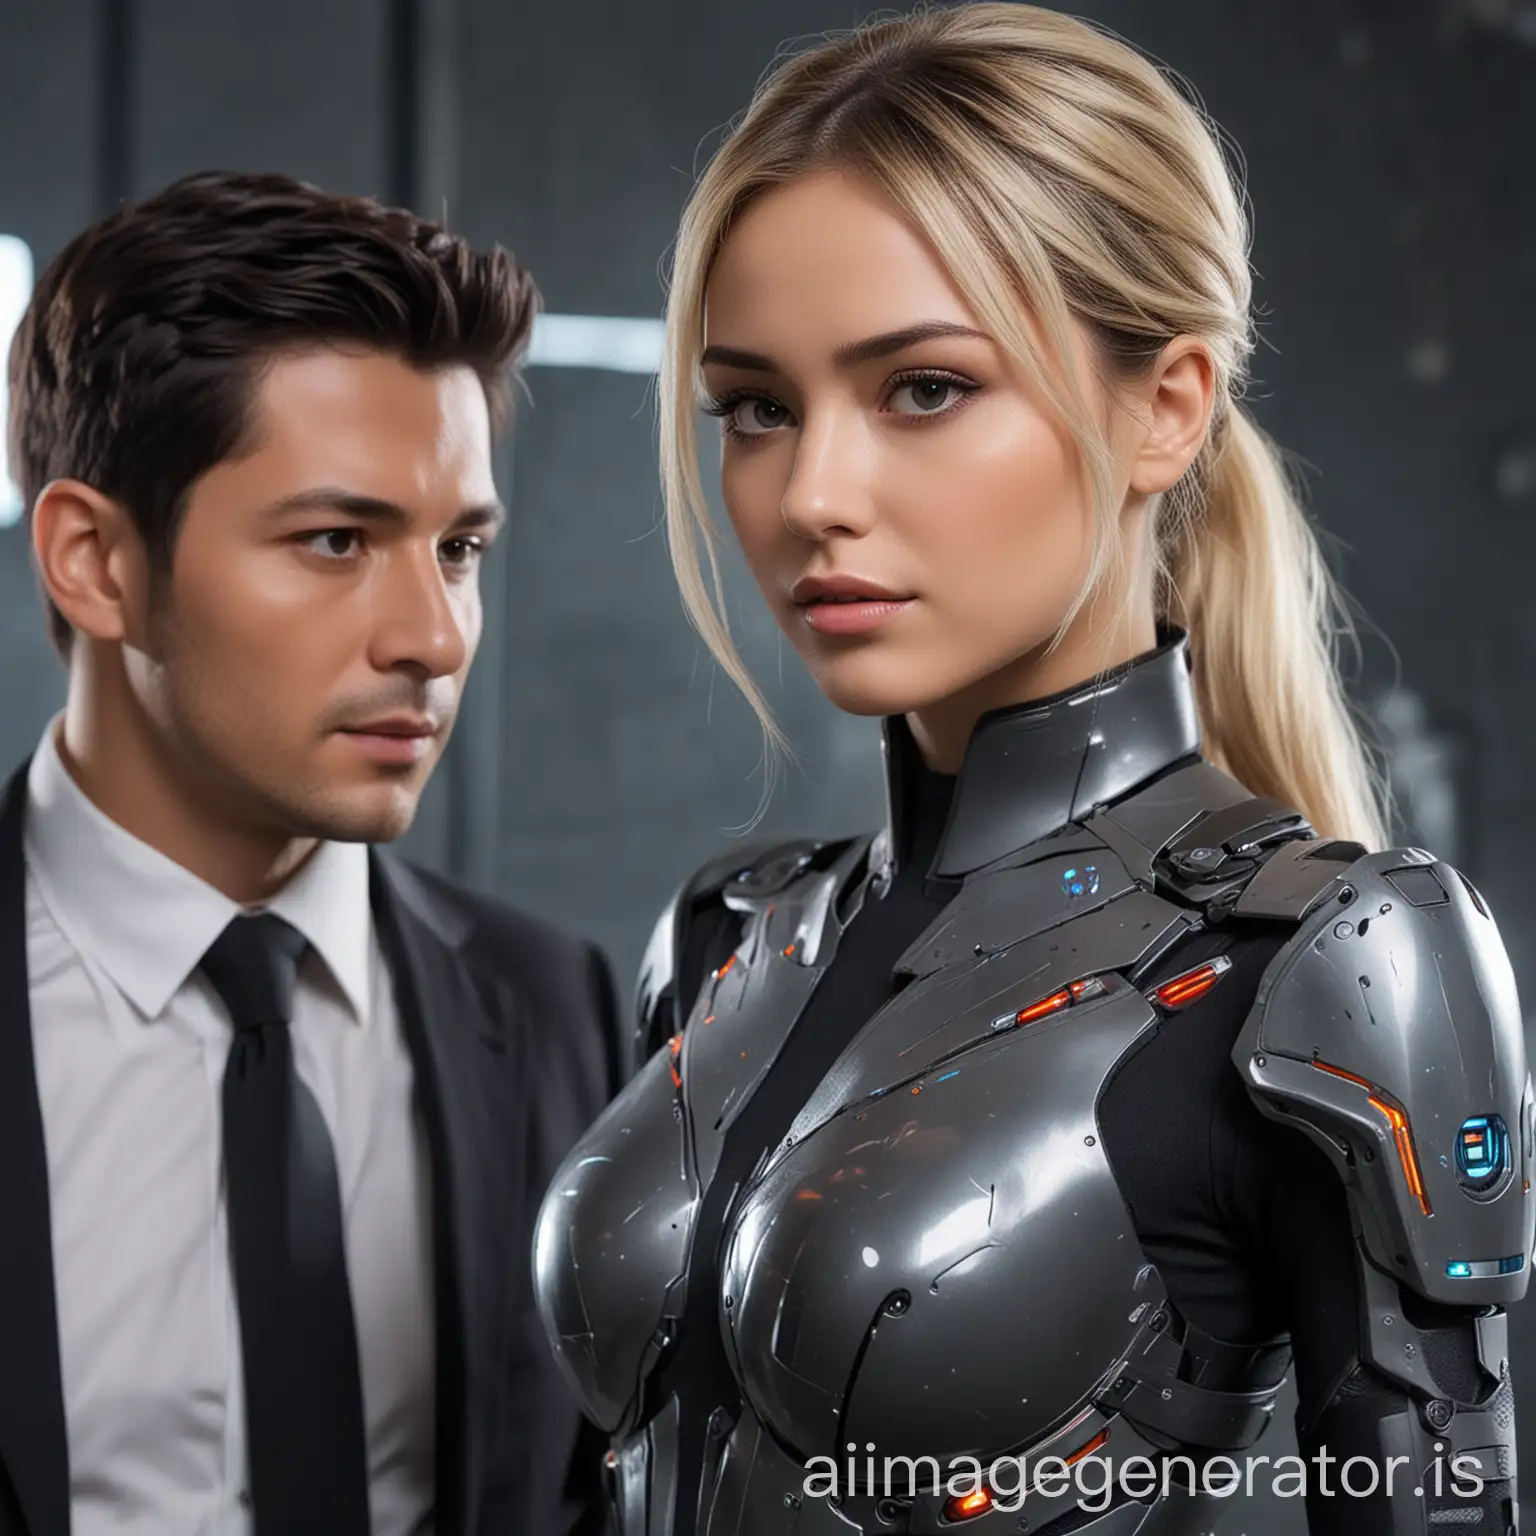 agent Pemburu Intelligent from the future who is very strong with a very beautiful and sexy female assistant